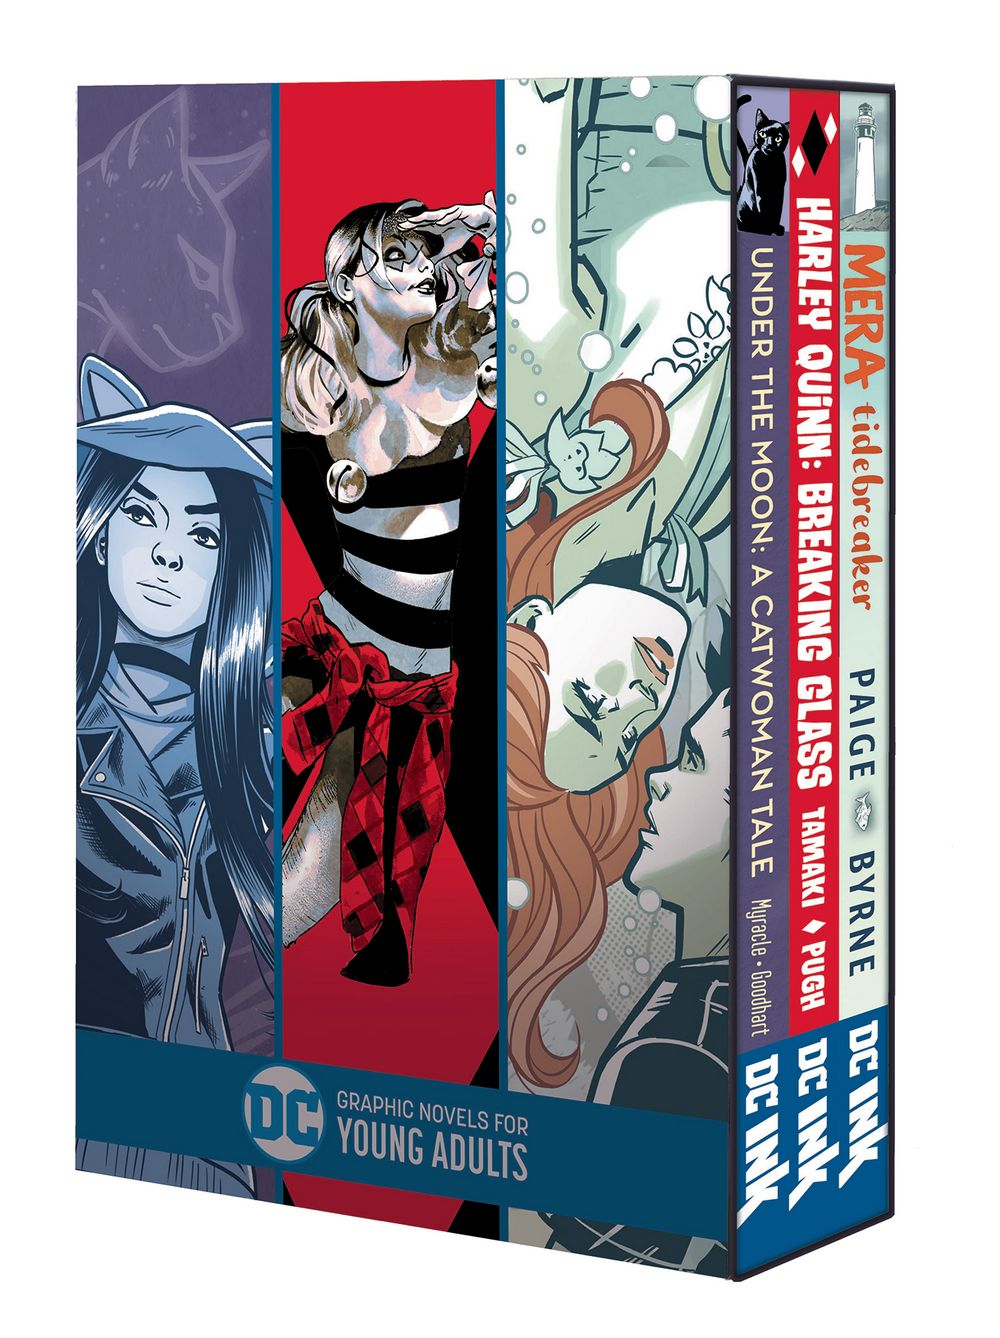 DC Graphic Novels For Young Adults Box Set